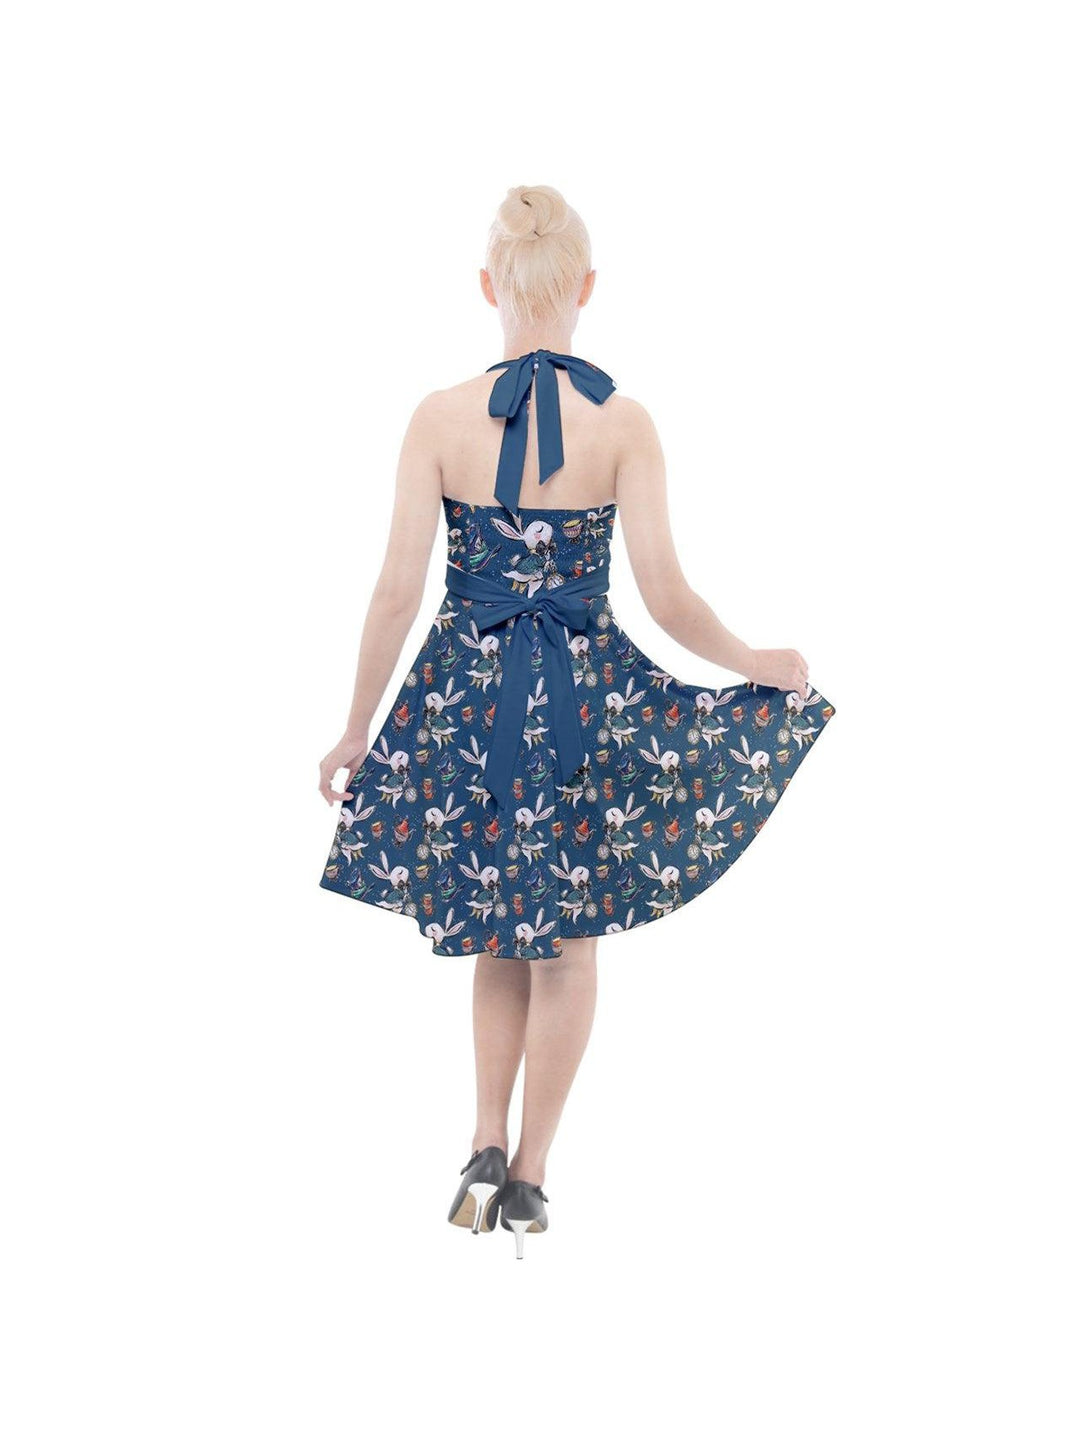 Down the Rabbit Hole Halter Party Swing Dress